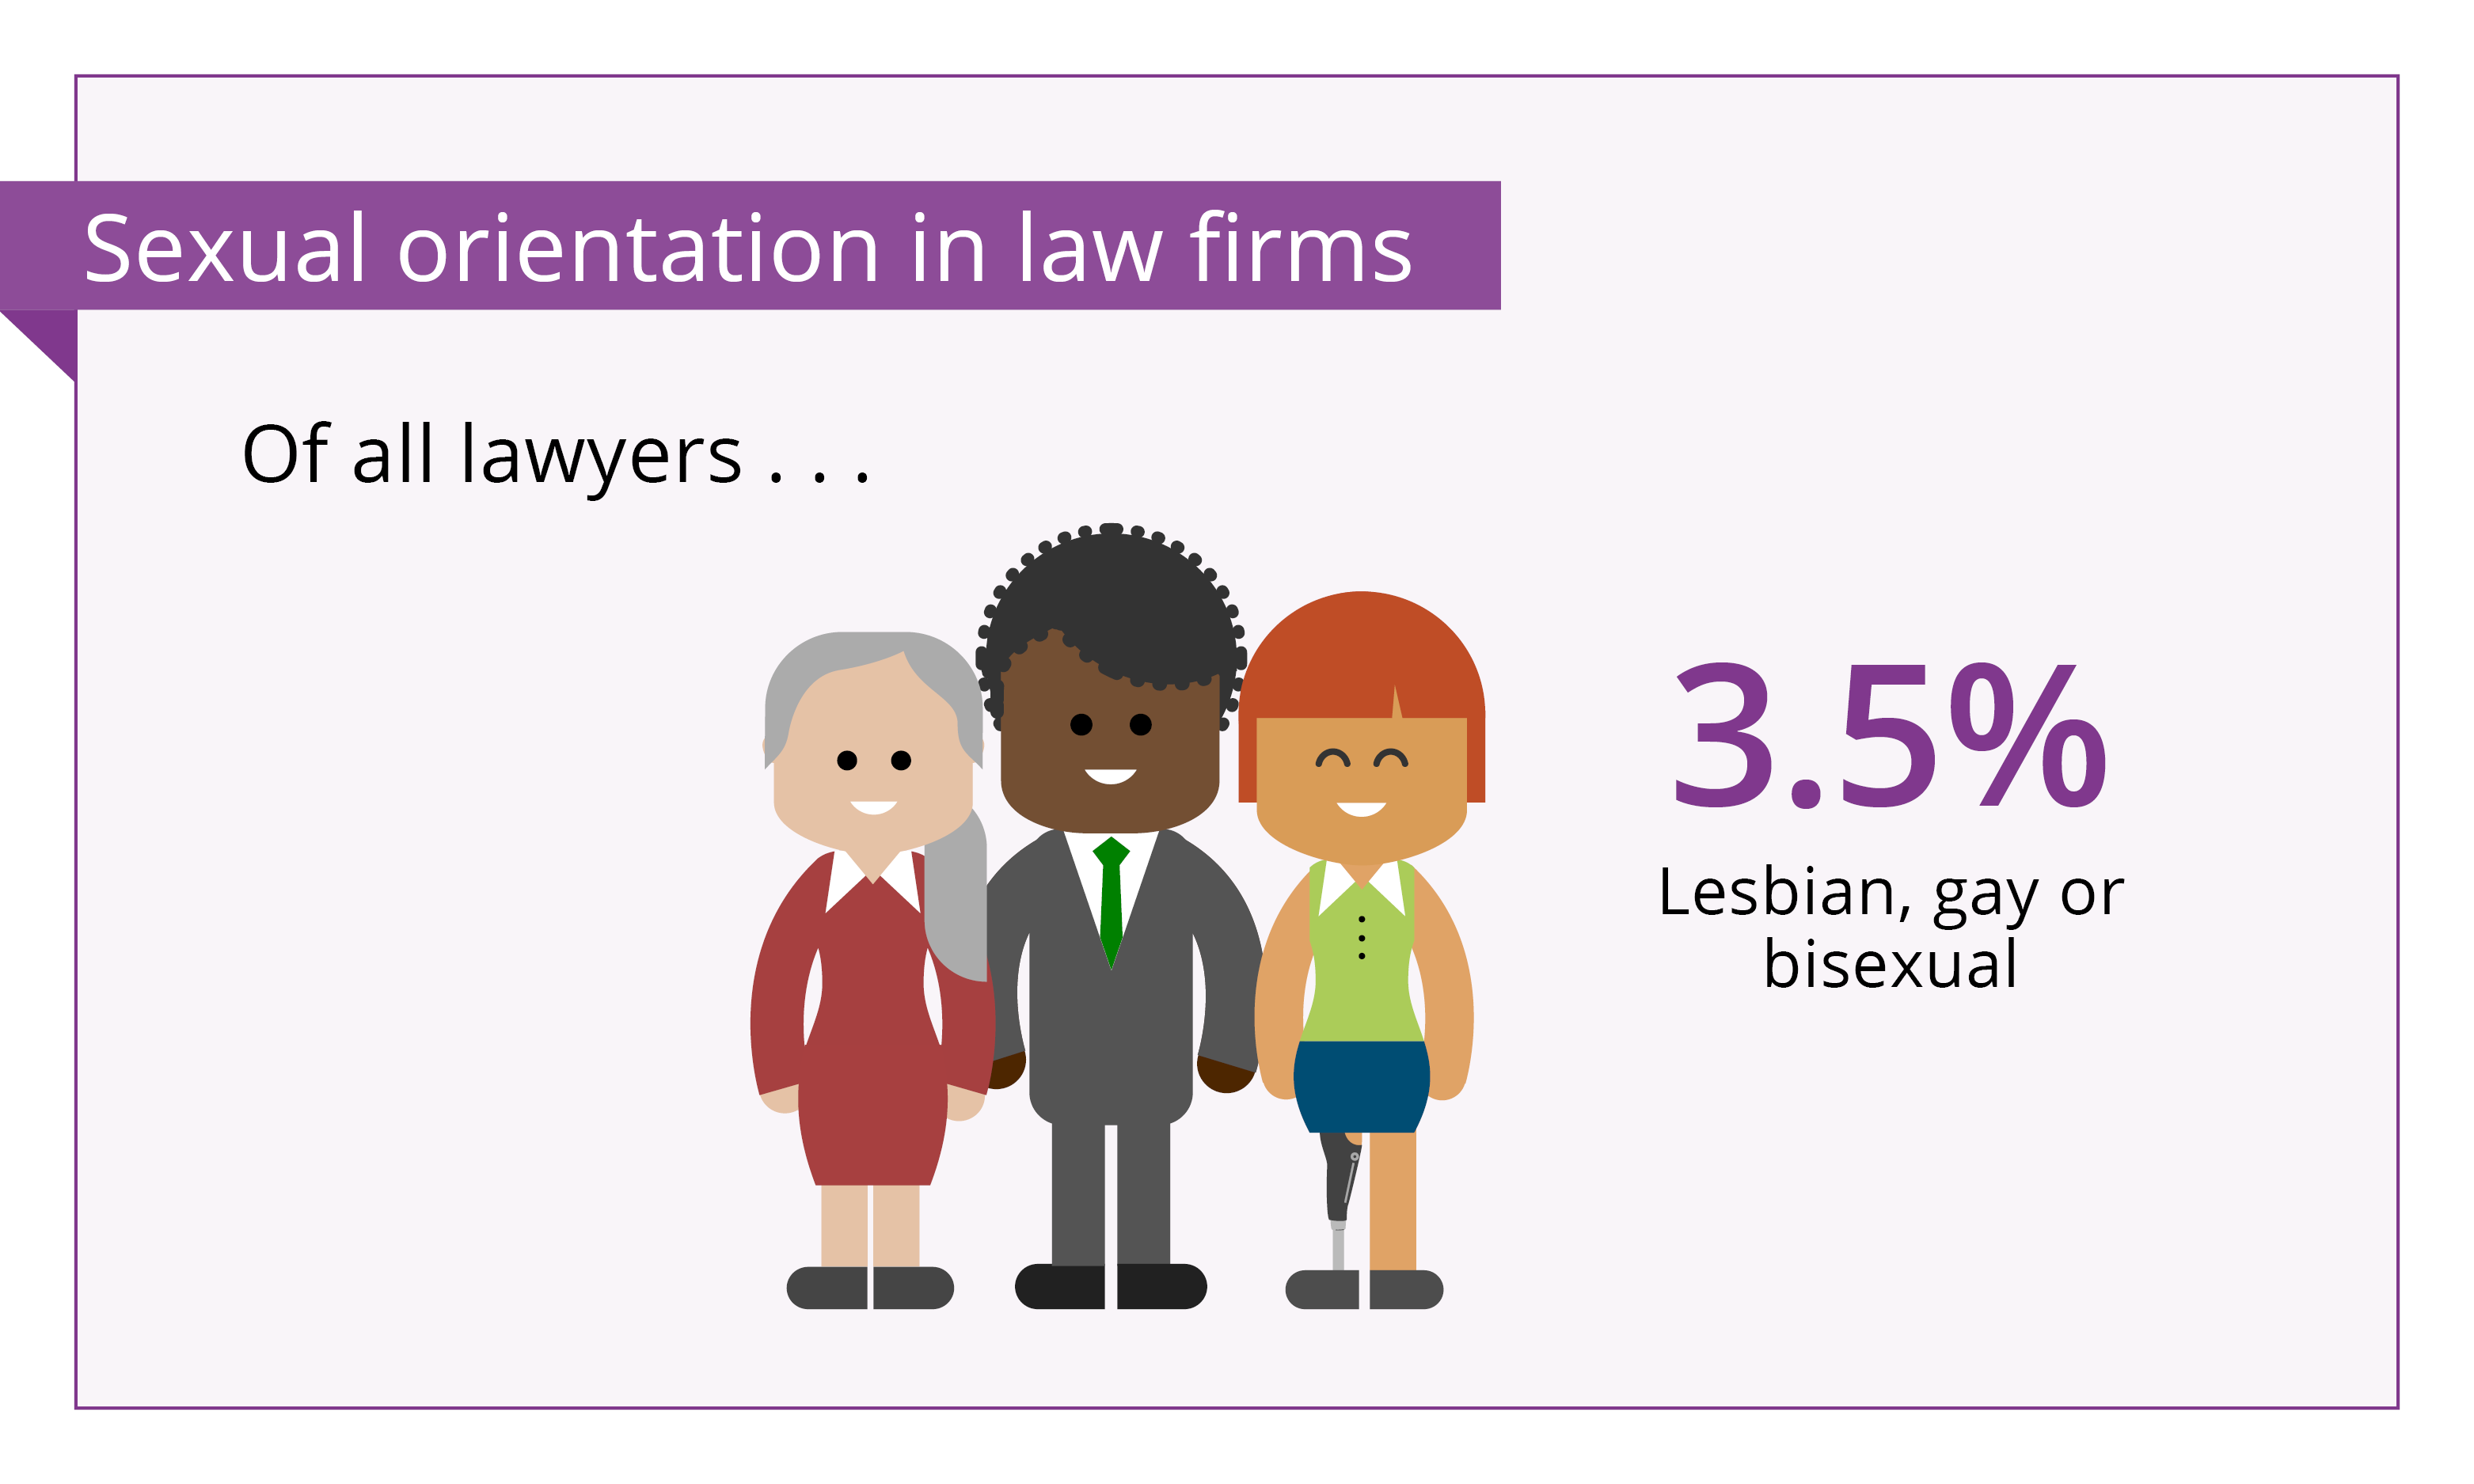 ROf all lawyers 3.5% Lesbian, gay or bisexualh